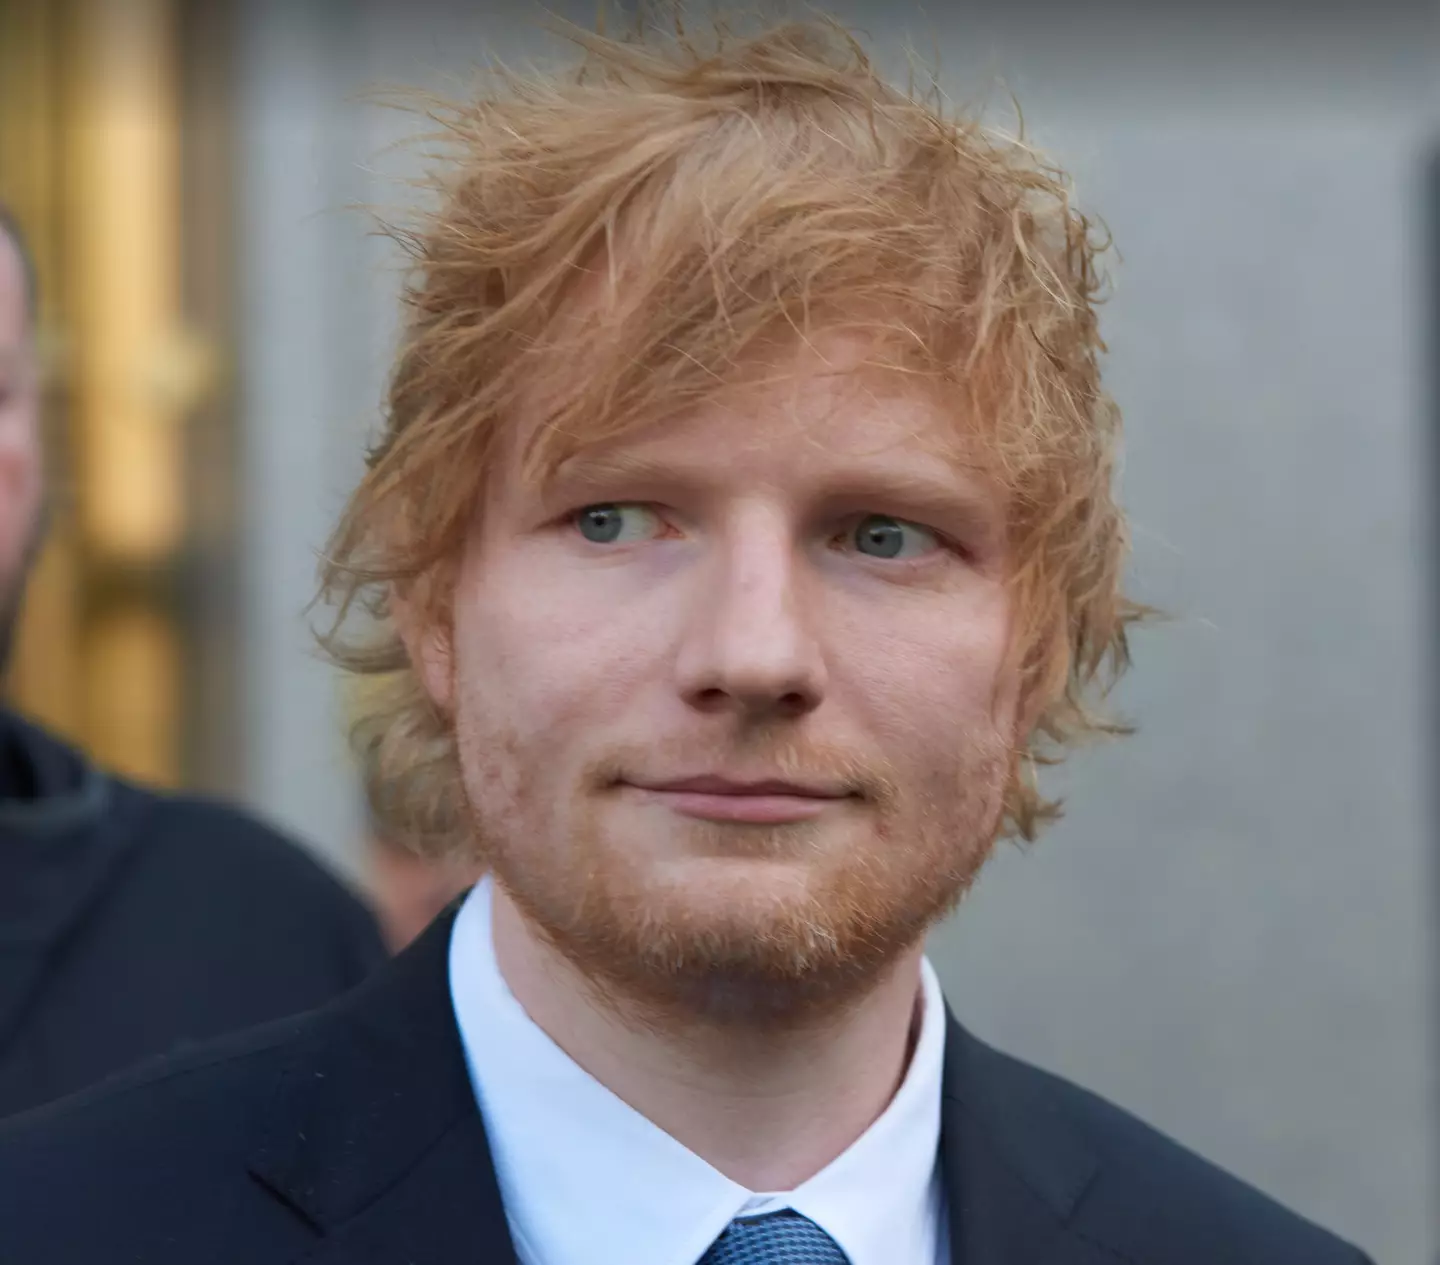 Ed Sheeran says he'll quit the music industry if he's found guilty.